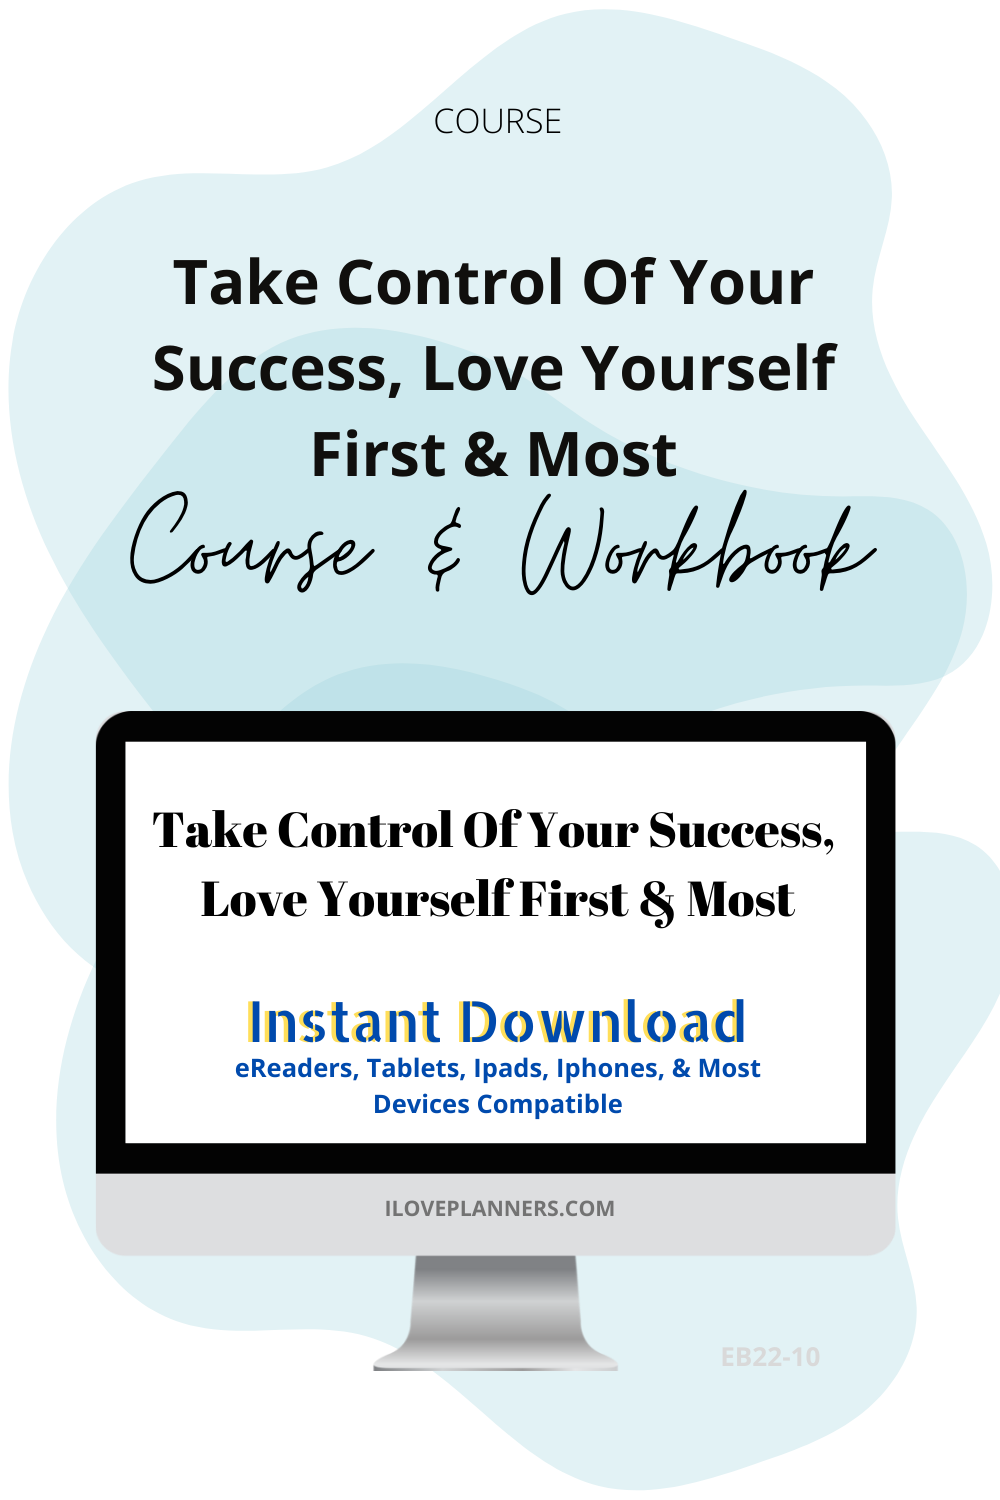 Take Control Of Your Success, Love Yourself First & Most Course & Workbook. EB22-10